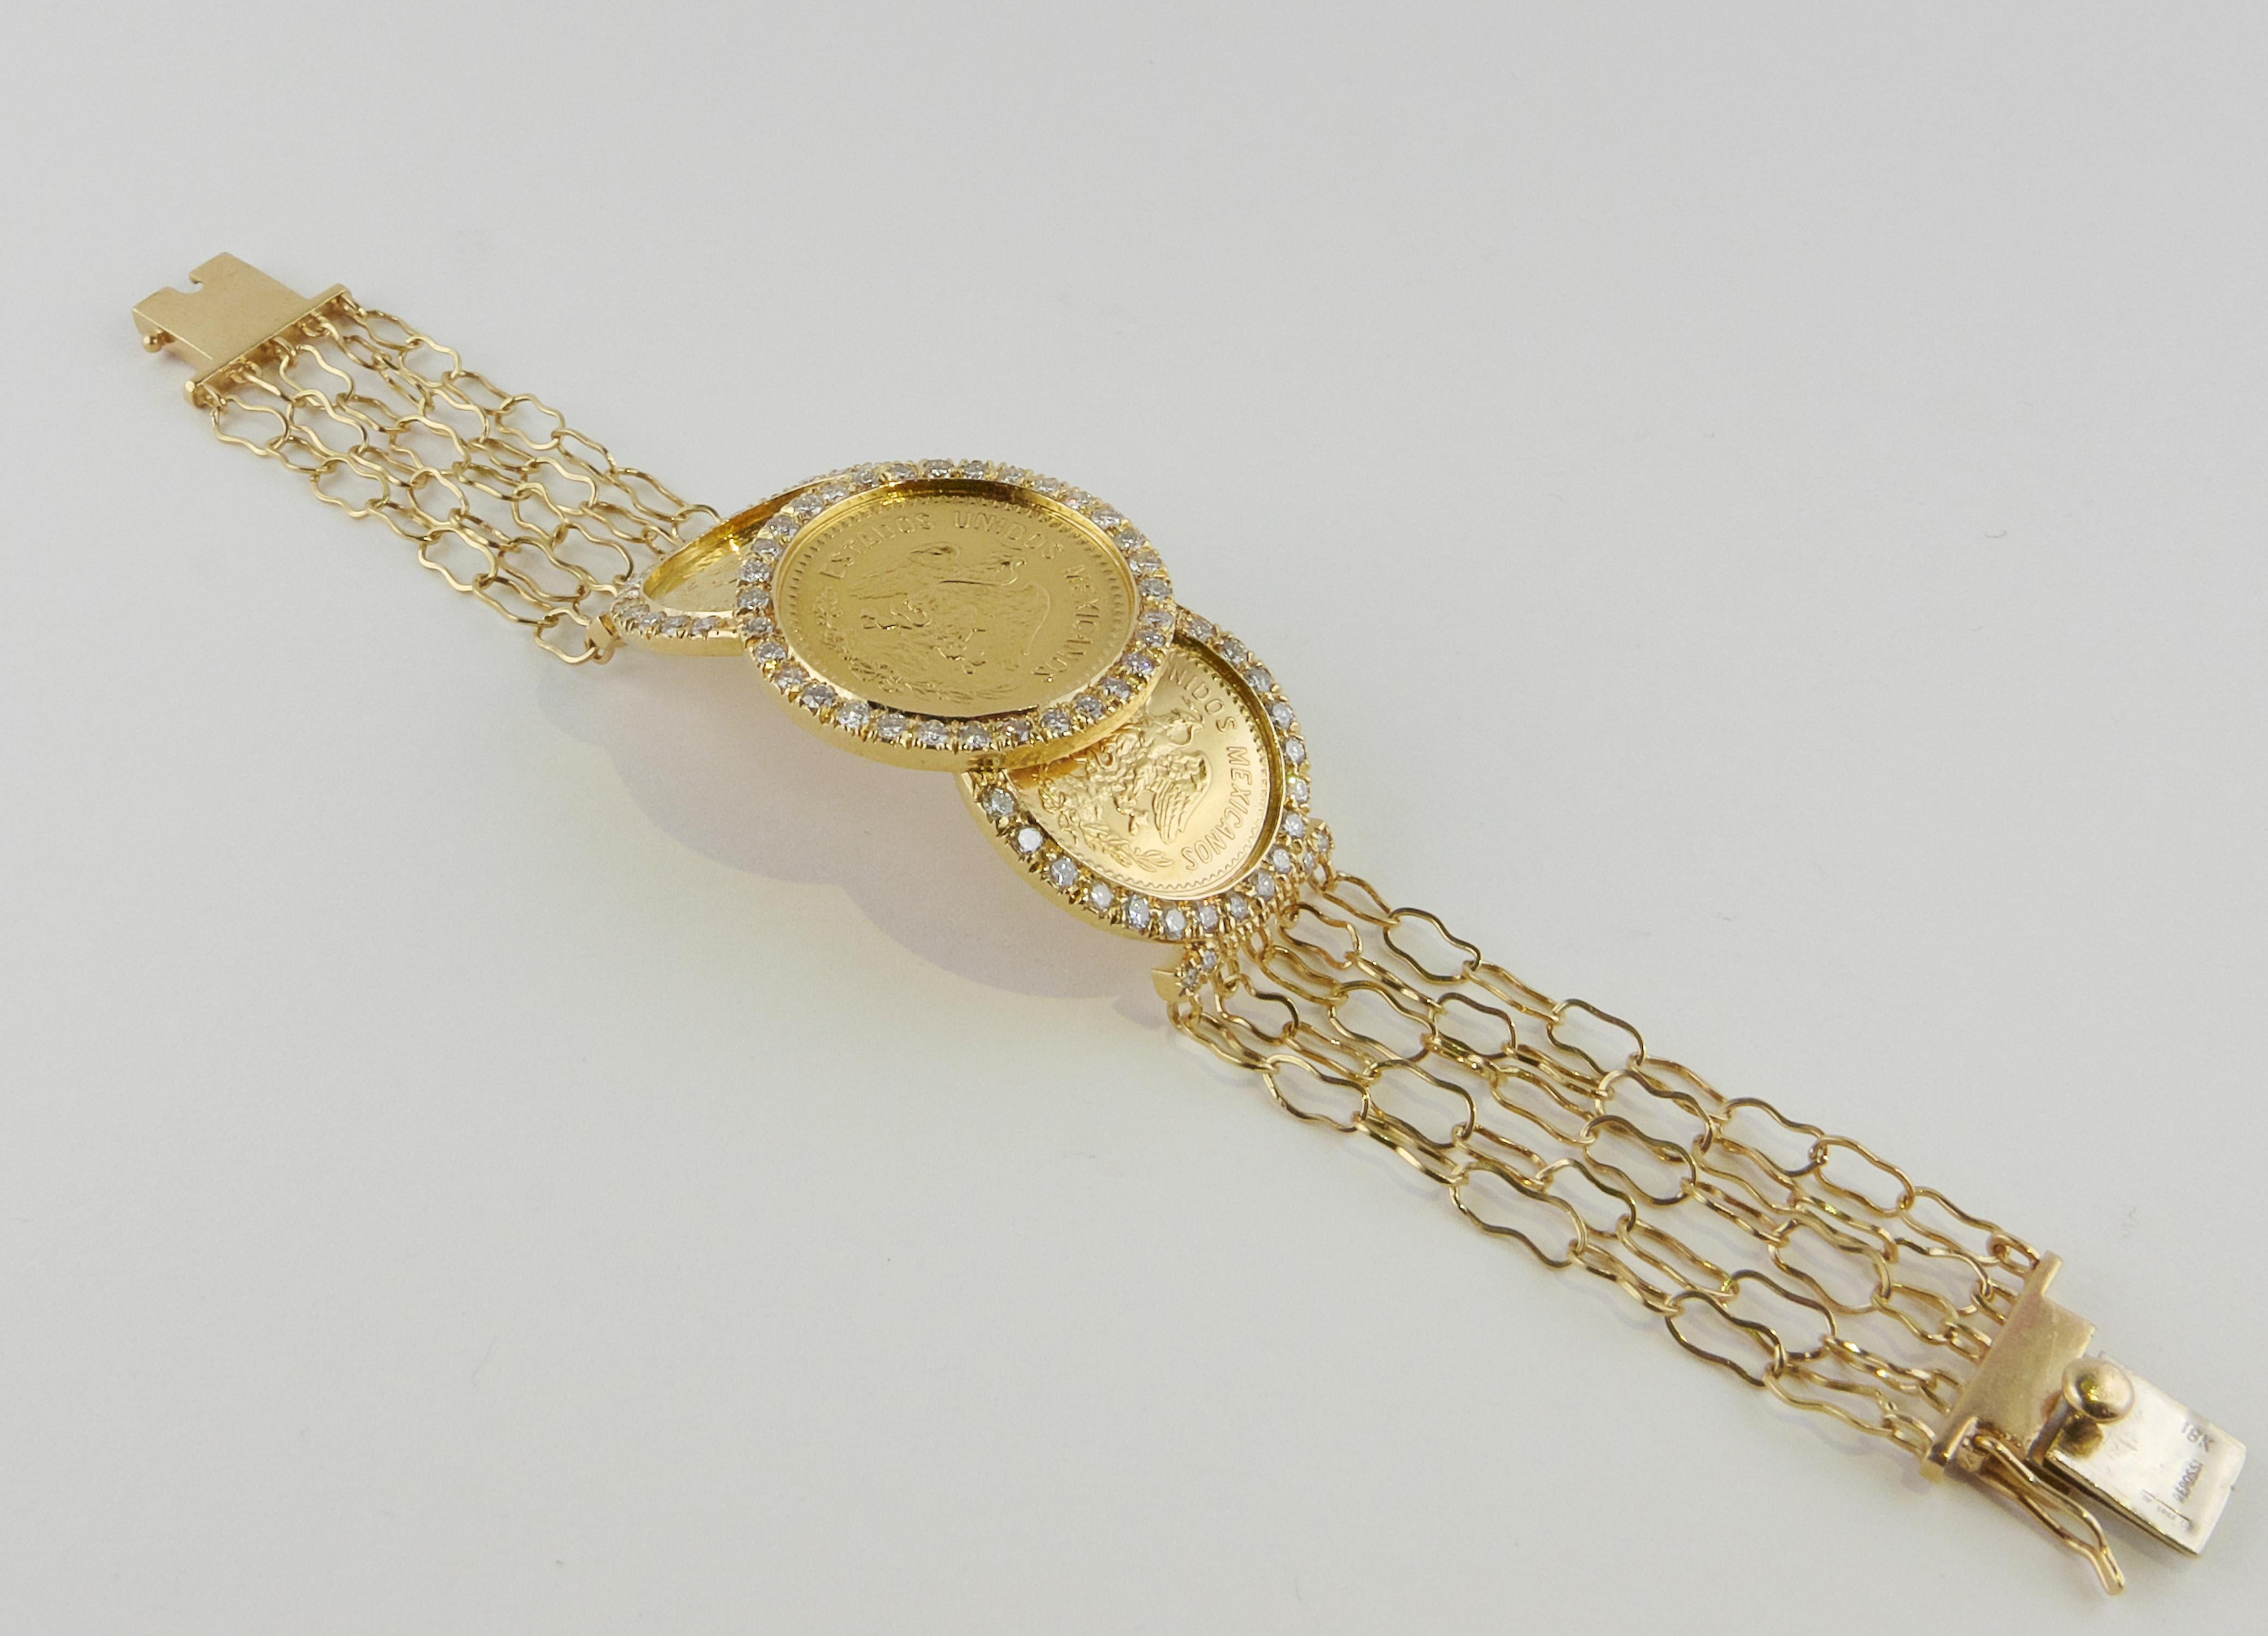 An extremely chic Bracelet composed of three 24K Yellow Gold coins set in an unusual articulated setting composed of five strands of 18K Gold chain. The three rich and warm tone Gold Mexican Pesos coins dated 1955, the central being the largest, are